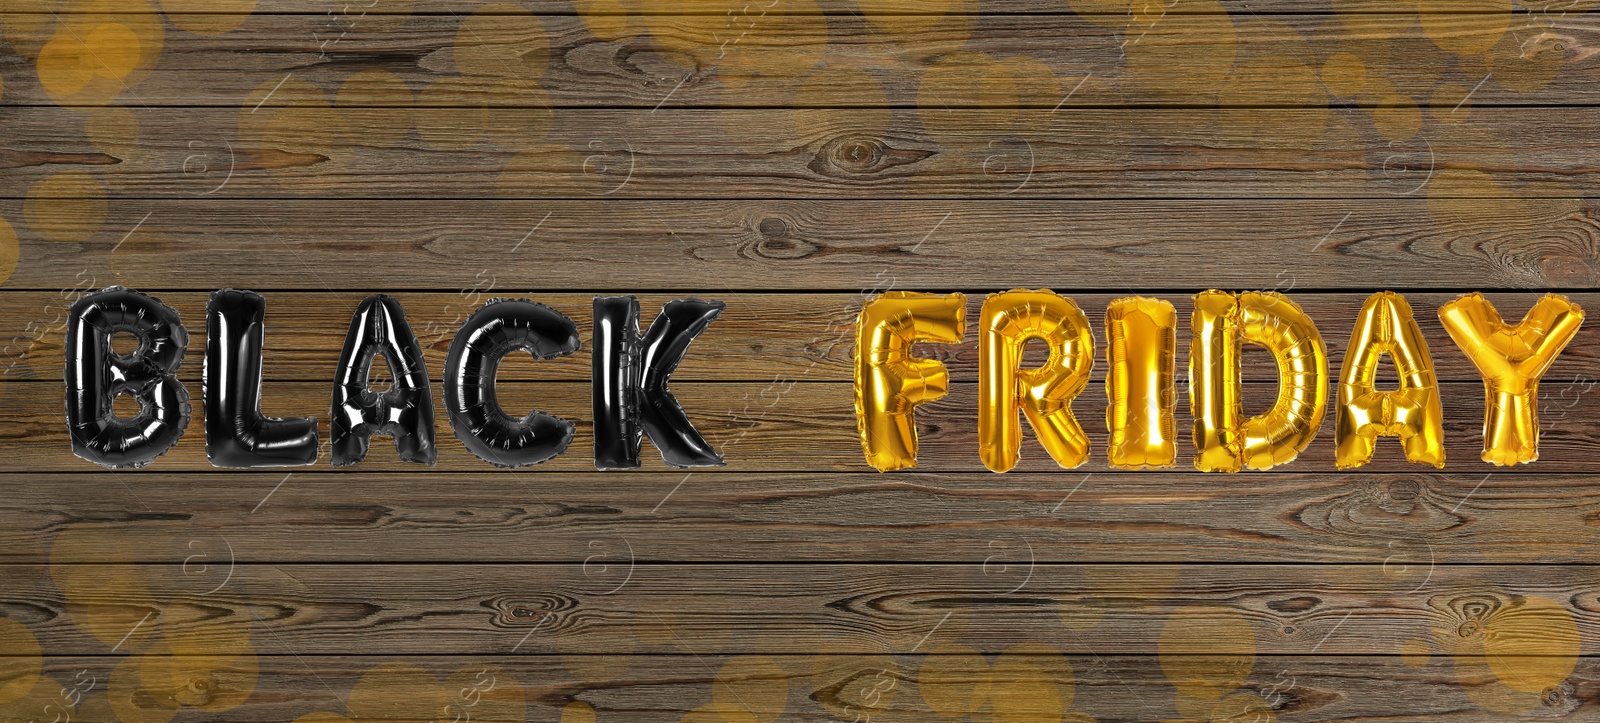 Image of Phrase BLACK FRIDAY made of foil balloon letters on wooden background. Banner design